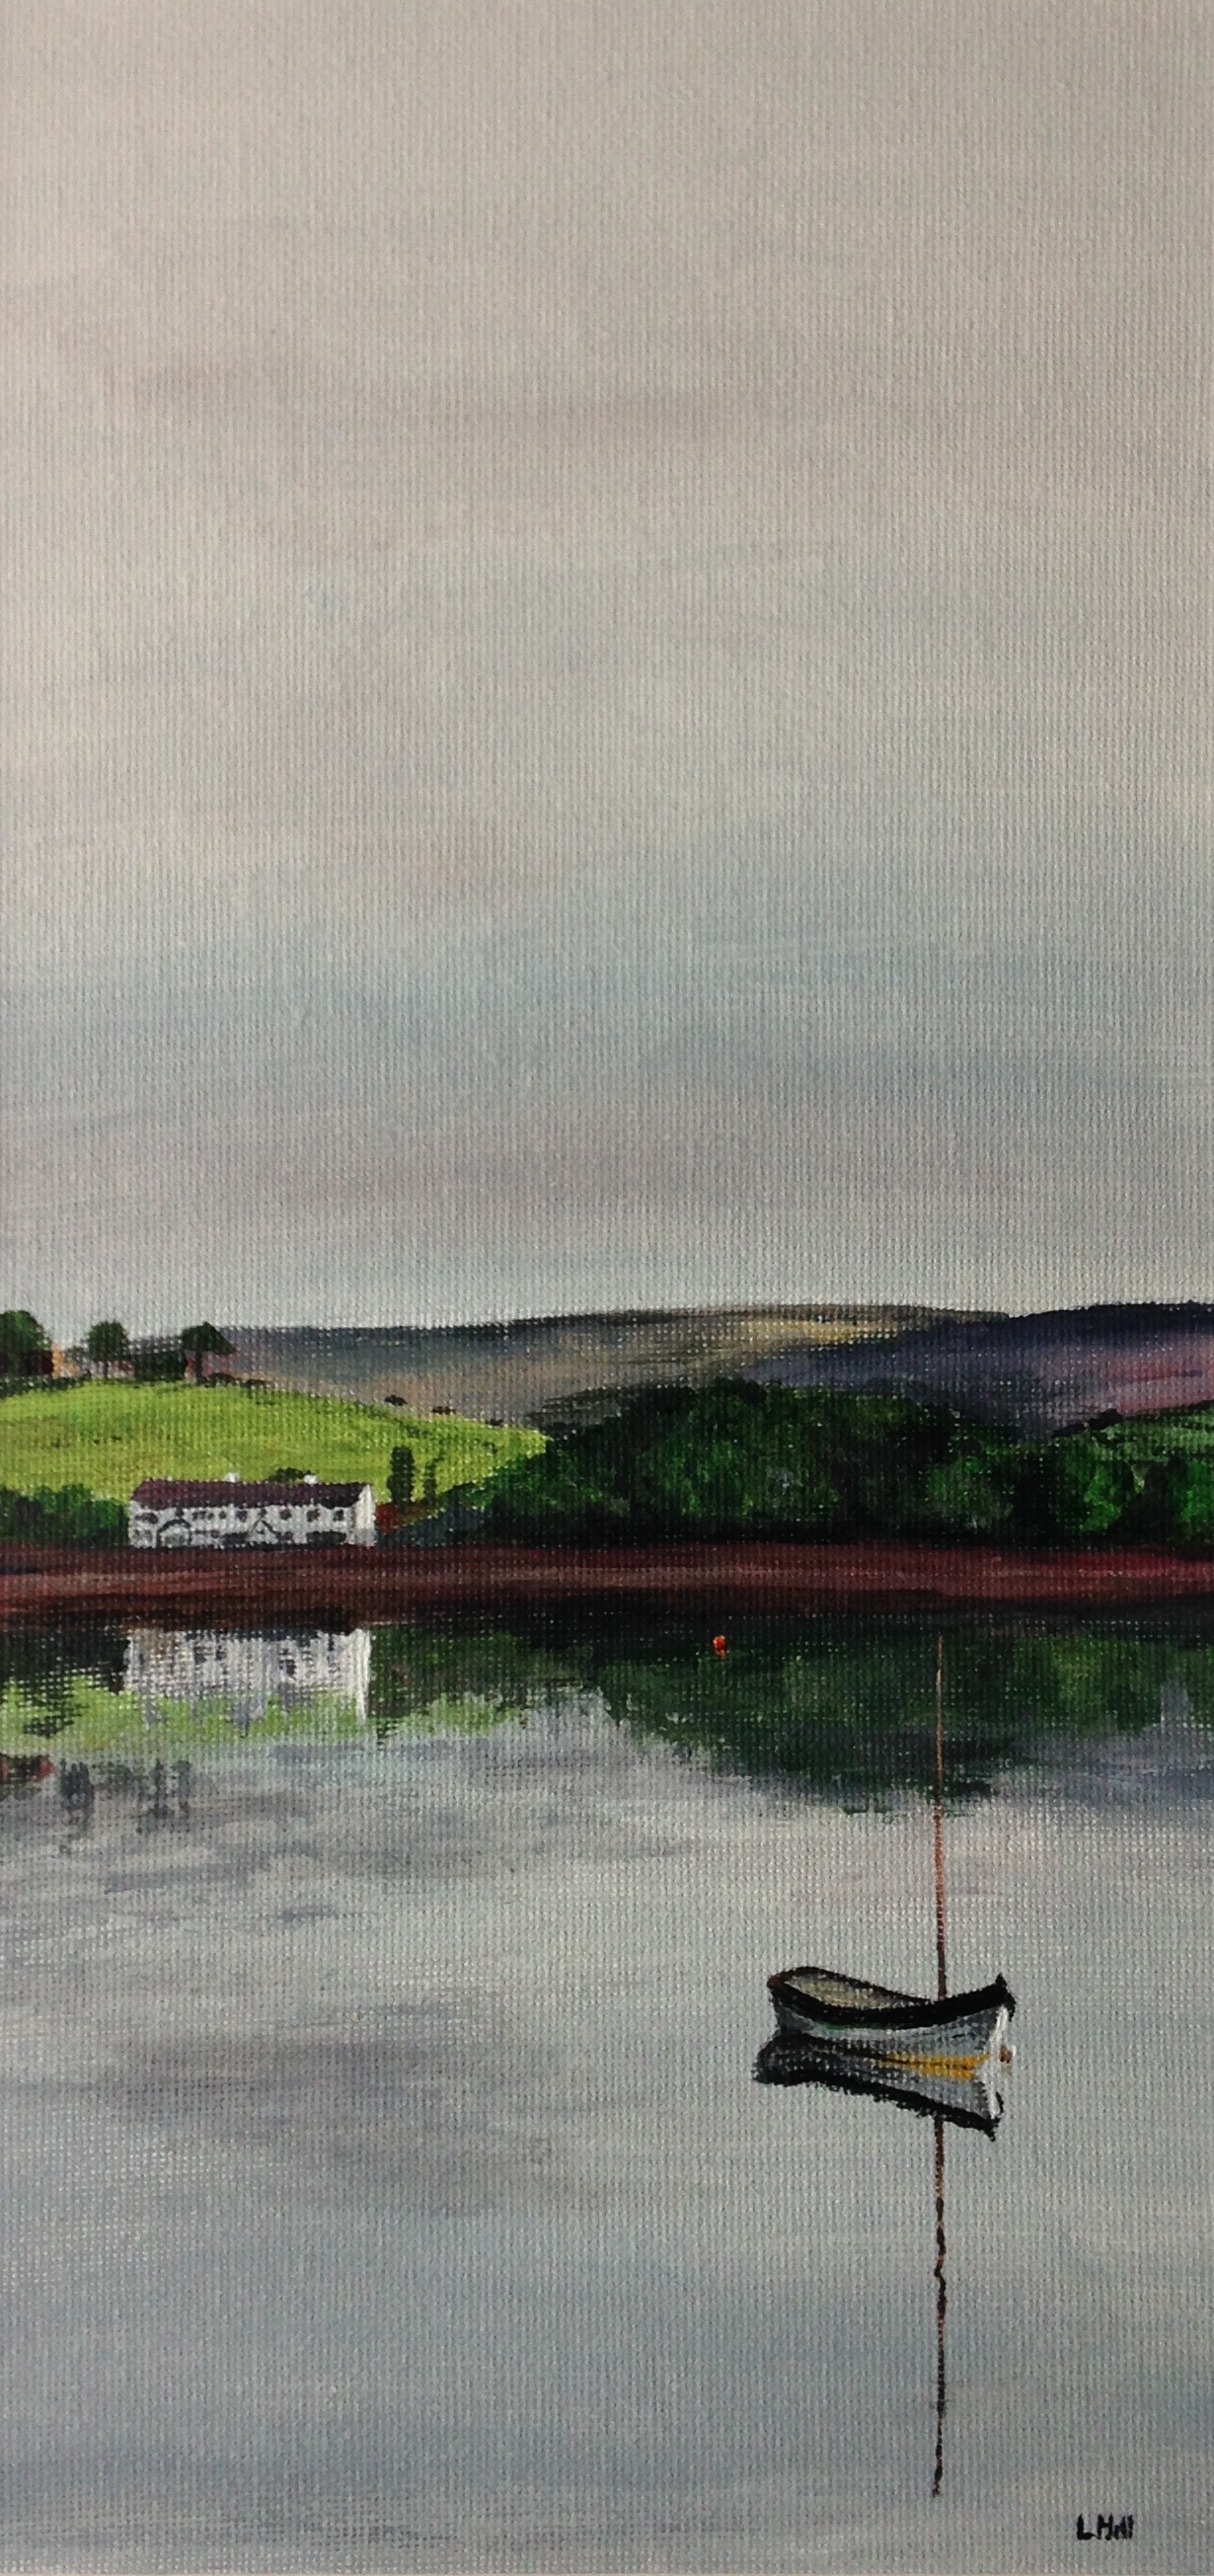 Boat on Hollingworth Lake, Littleborough, acrylic painting by Louisa Hill